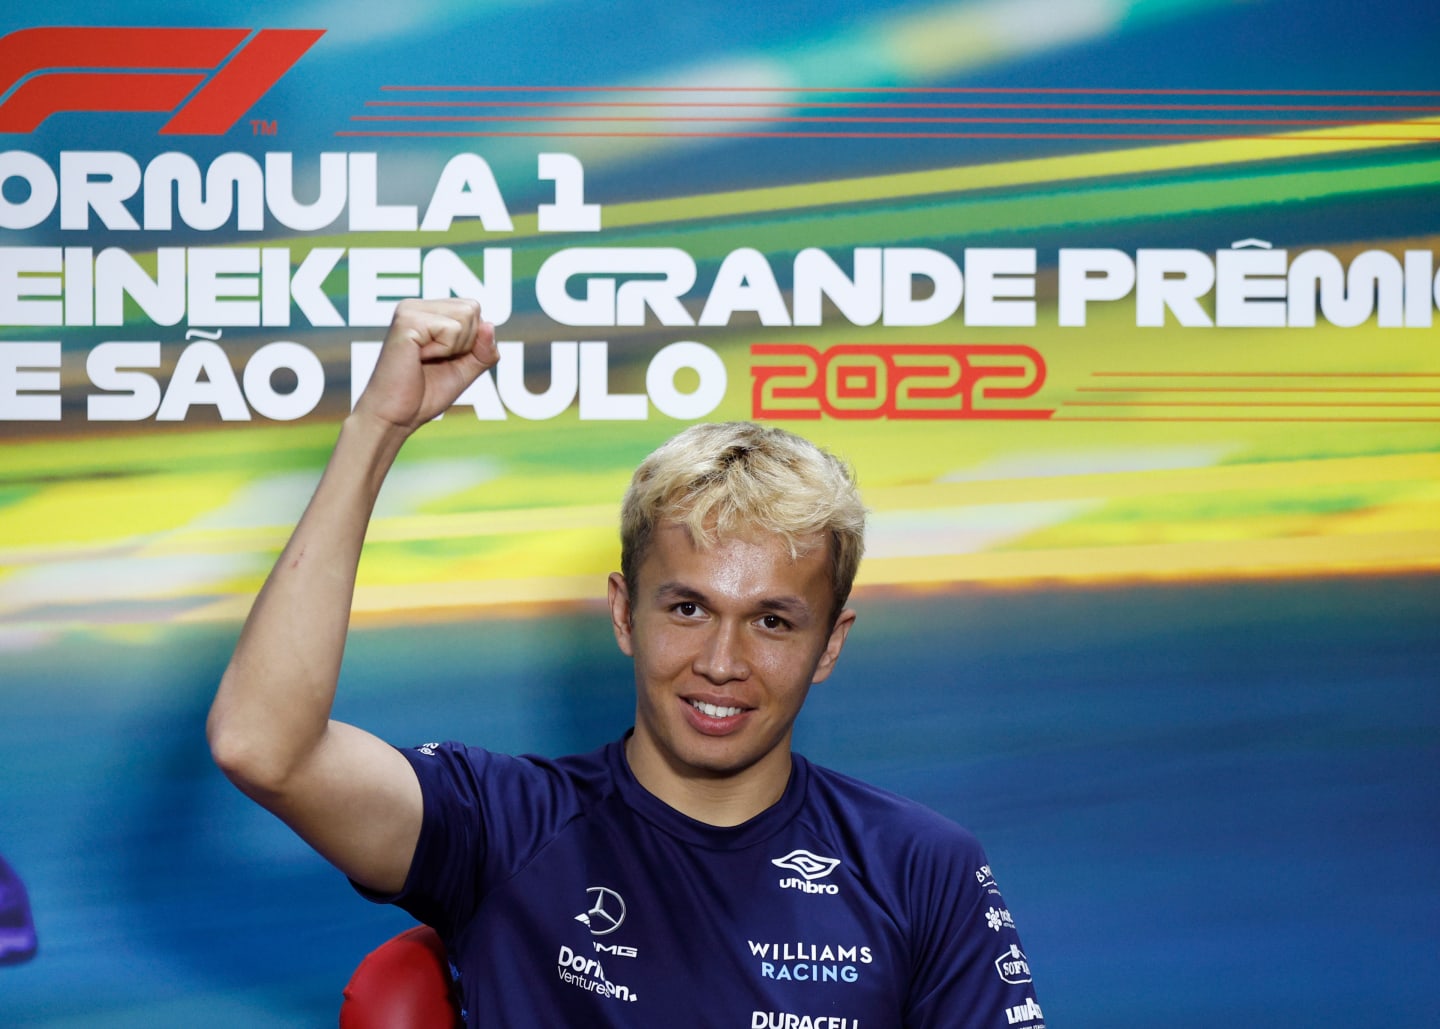 SAO PAULO, BRAZIL - NOVEMBER 10: Alexander Albon of Thailand and Williams attends the Drivers Press Conference during previews ahead of the F1 Grand Prix of Brazil at Autodromo Jose Carlos Pace on November 10, 2022 in Sao Paulo, Brazil. (Photo by Jared C. Tilton/Getty Images)